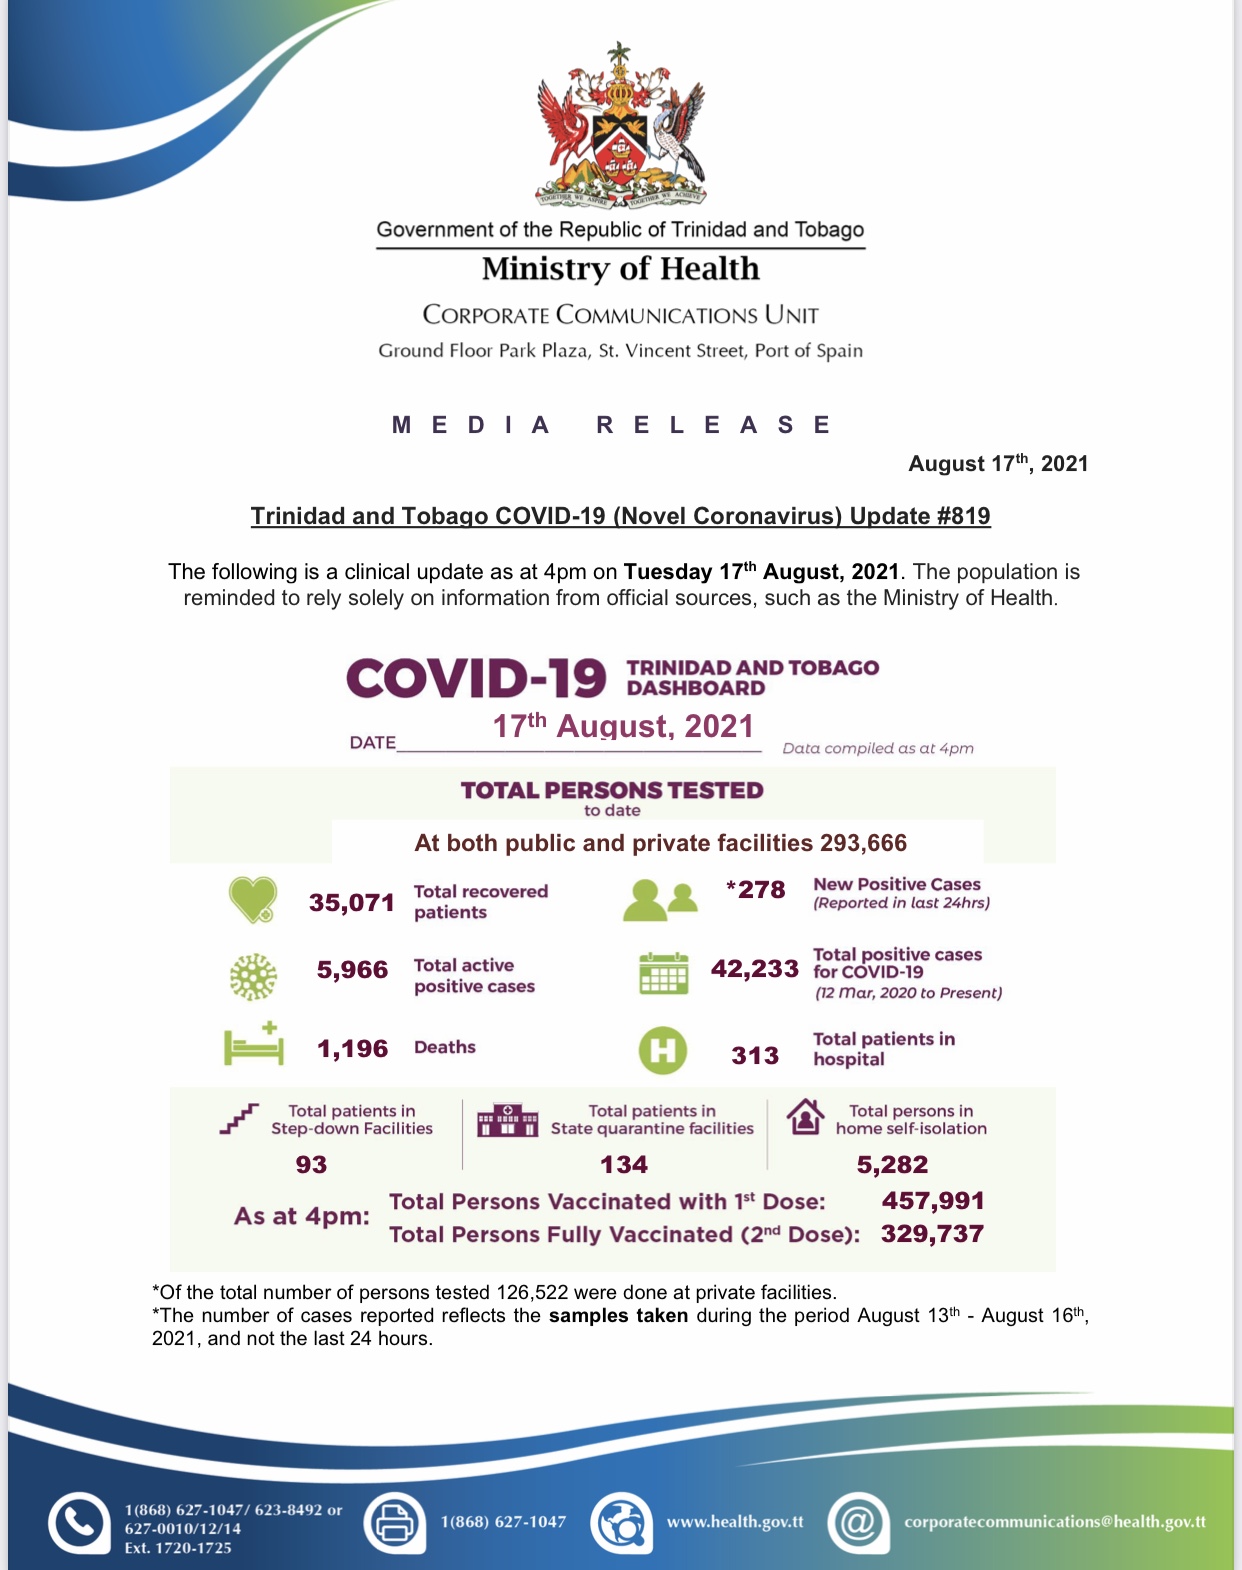 MOH Covid 19 update Tue Aug 17th- 8 deaths and 278 new positive cases